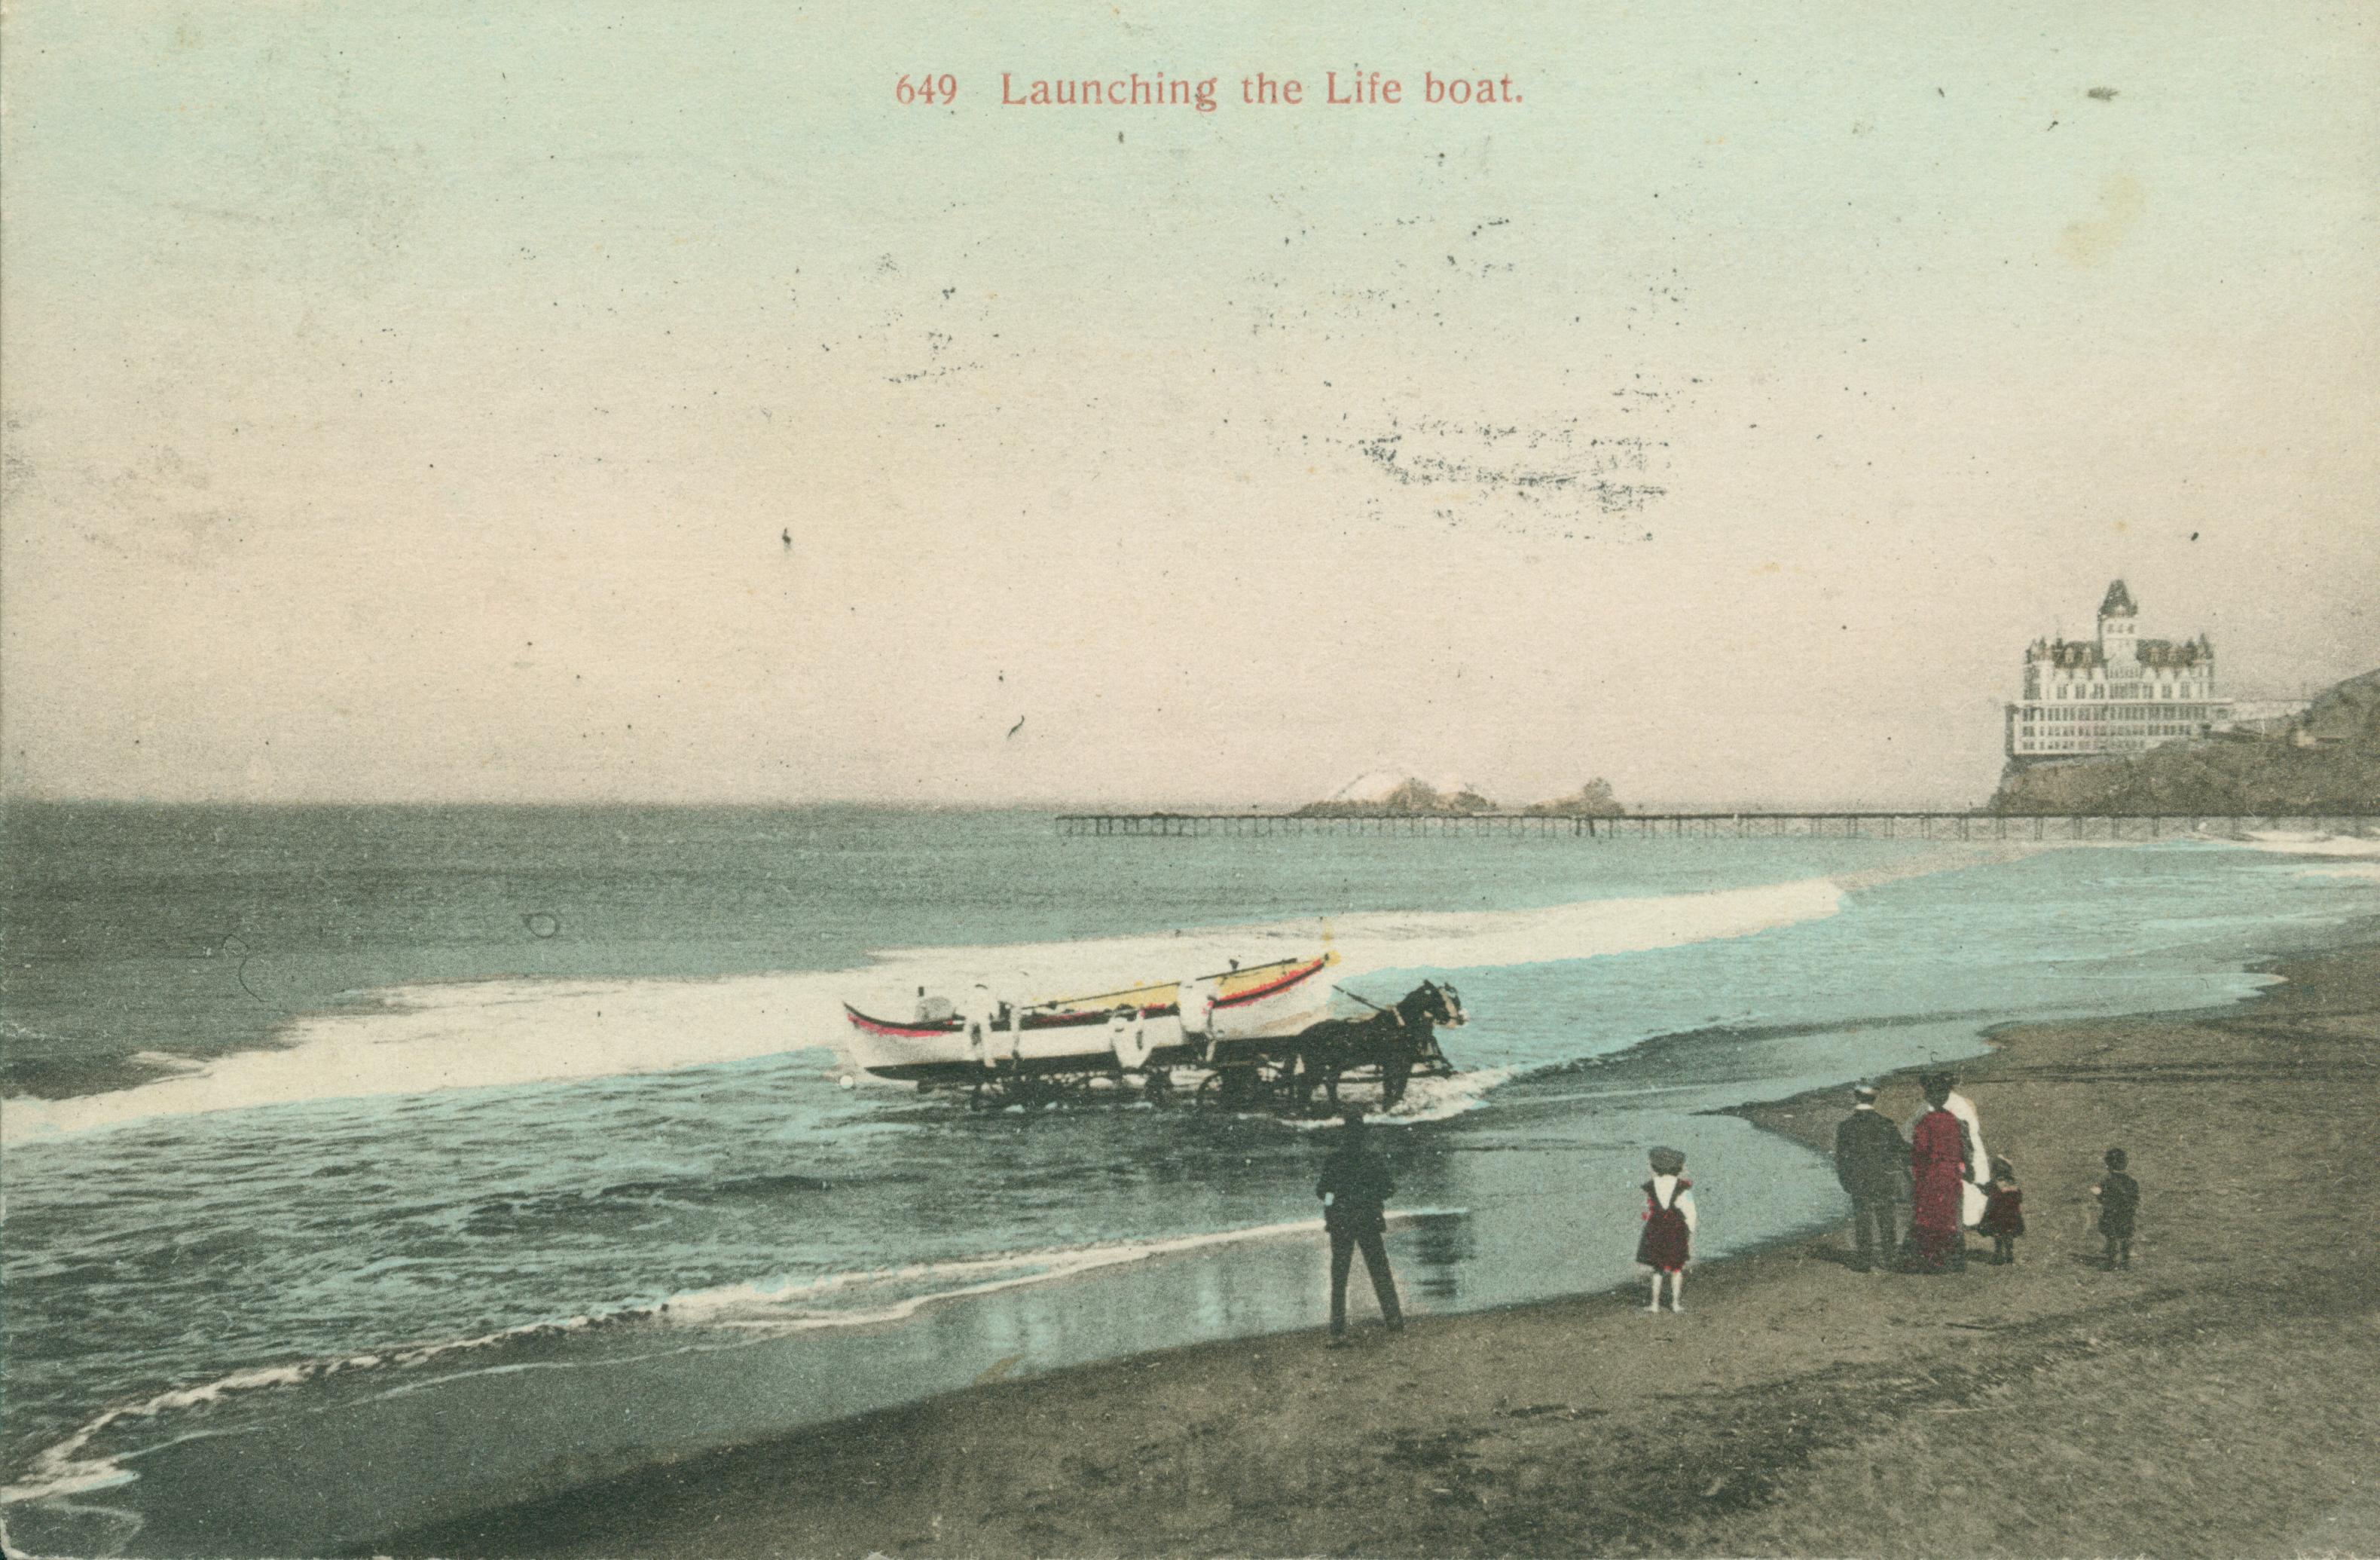 Shows a lifeboat being launched with the old Cliff House in the background.